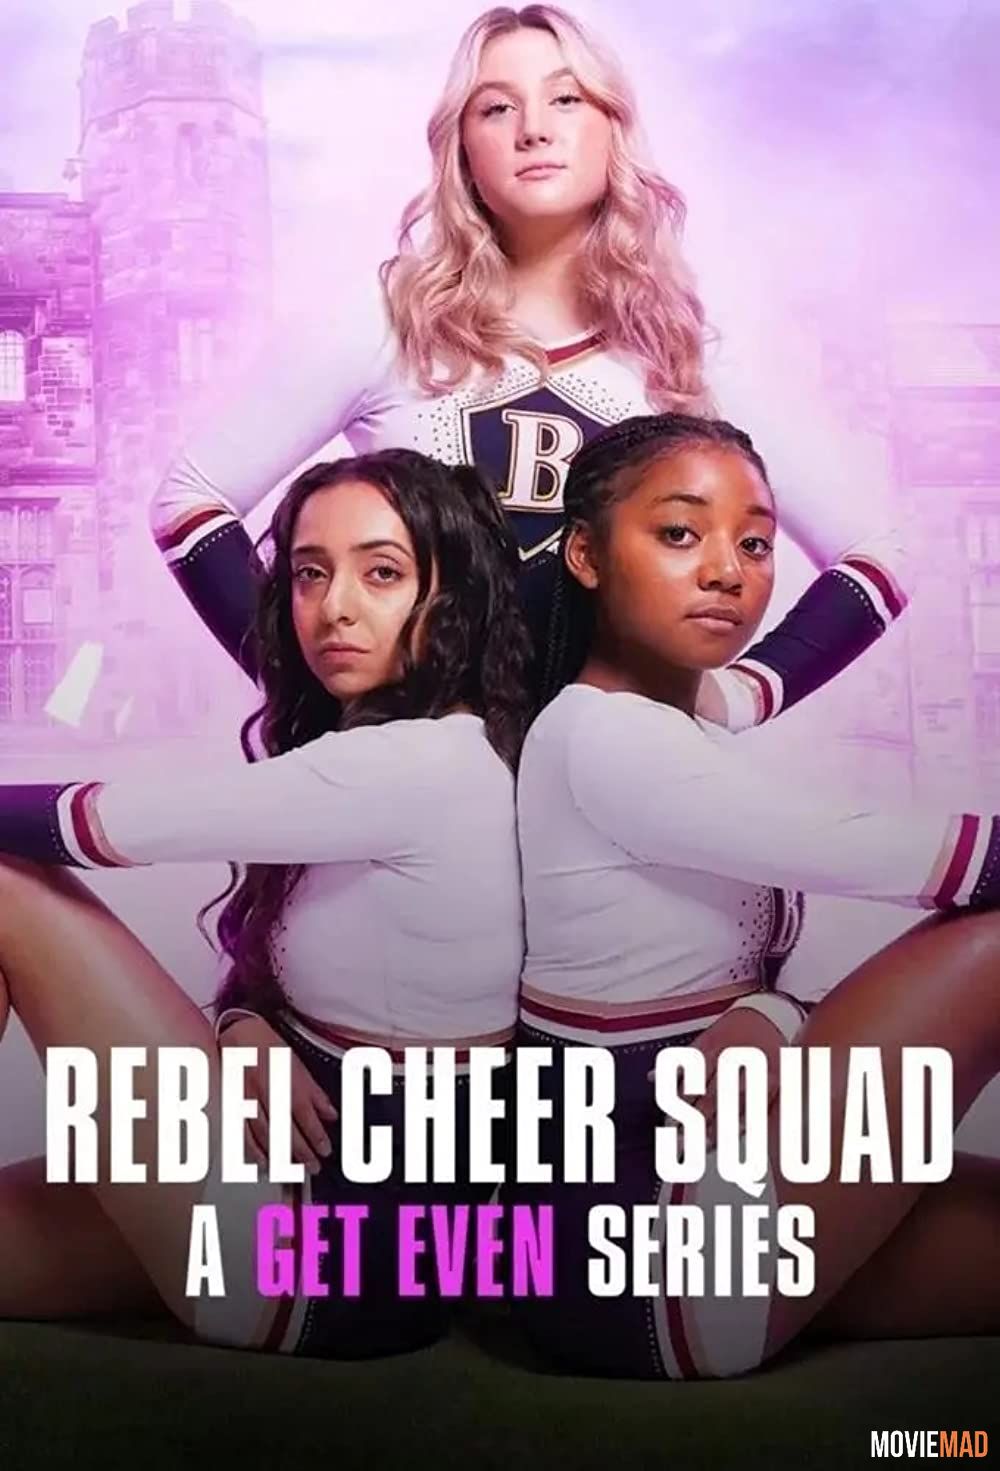 full moviesRebel Cheer Squad A Get Even Series S01 (2022) Hindi Dubbed NF Series HDRip 1080p 720p 480p